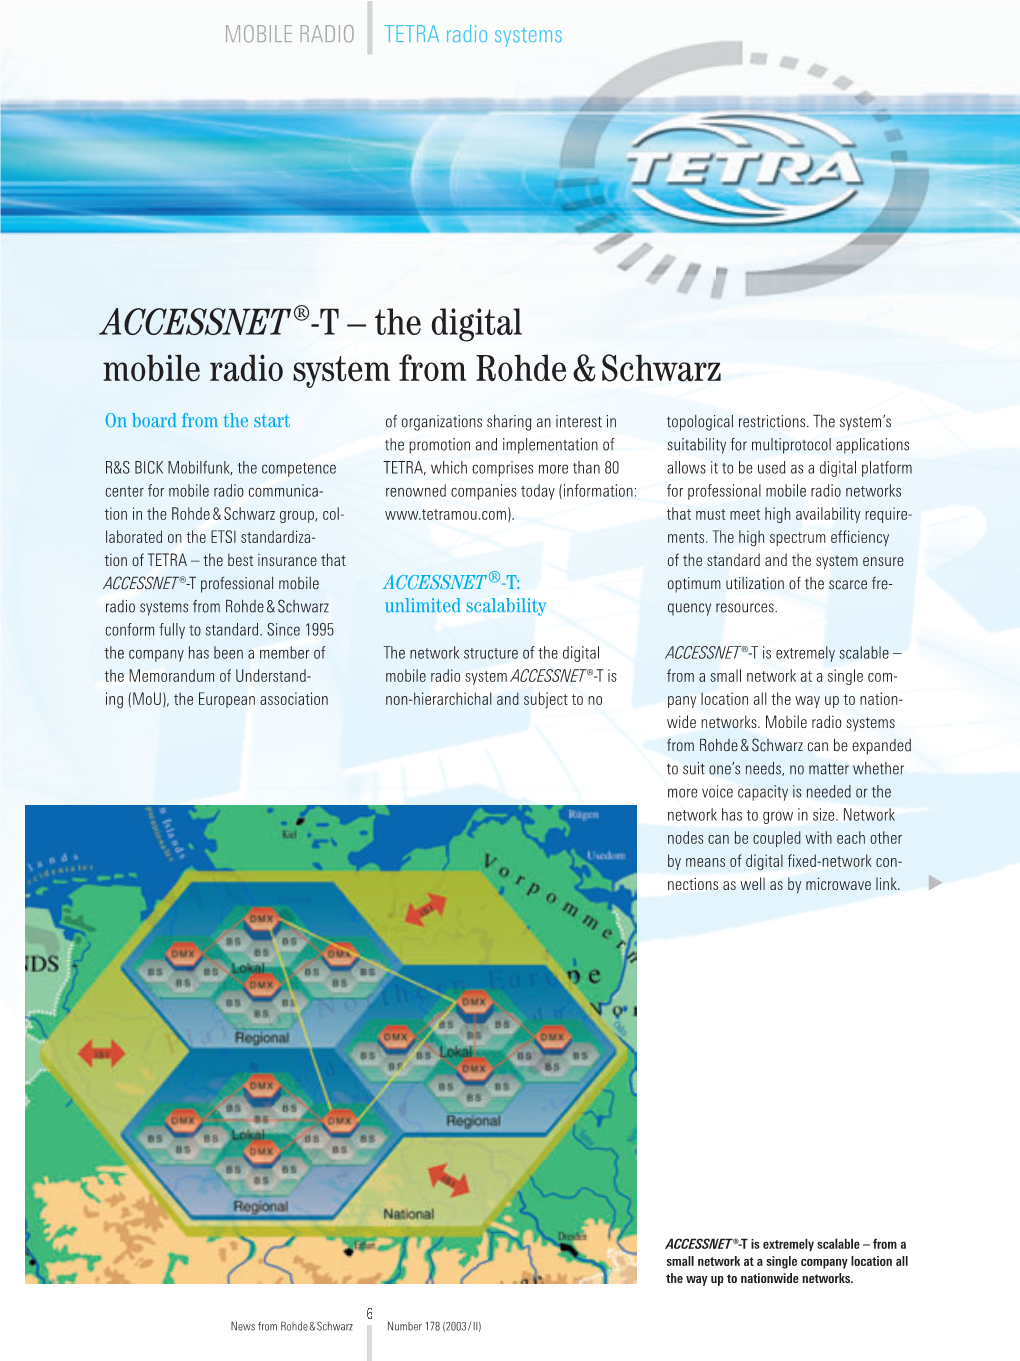 ACCESSNET®-T – the Digital Mobile Radio System from Rohde & Schwarz